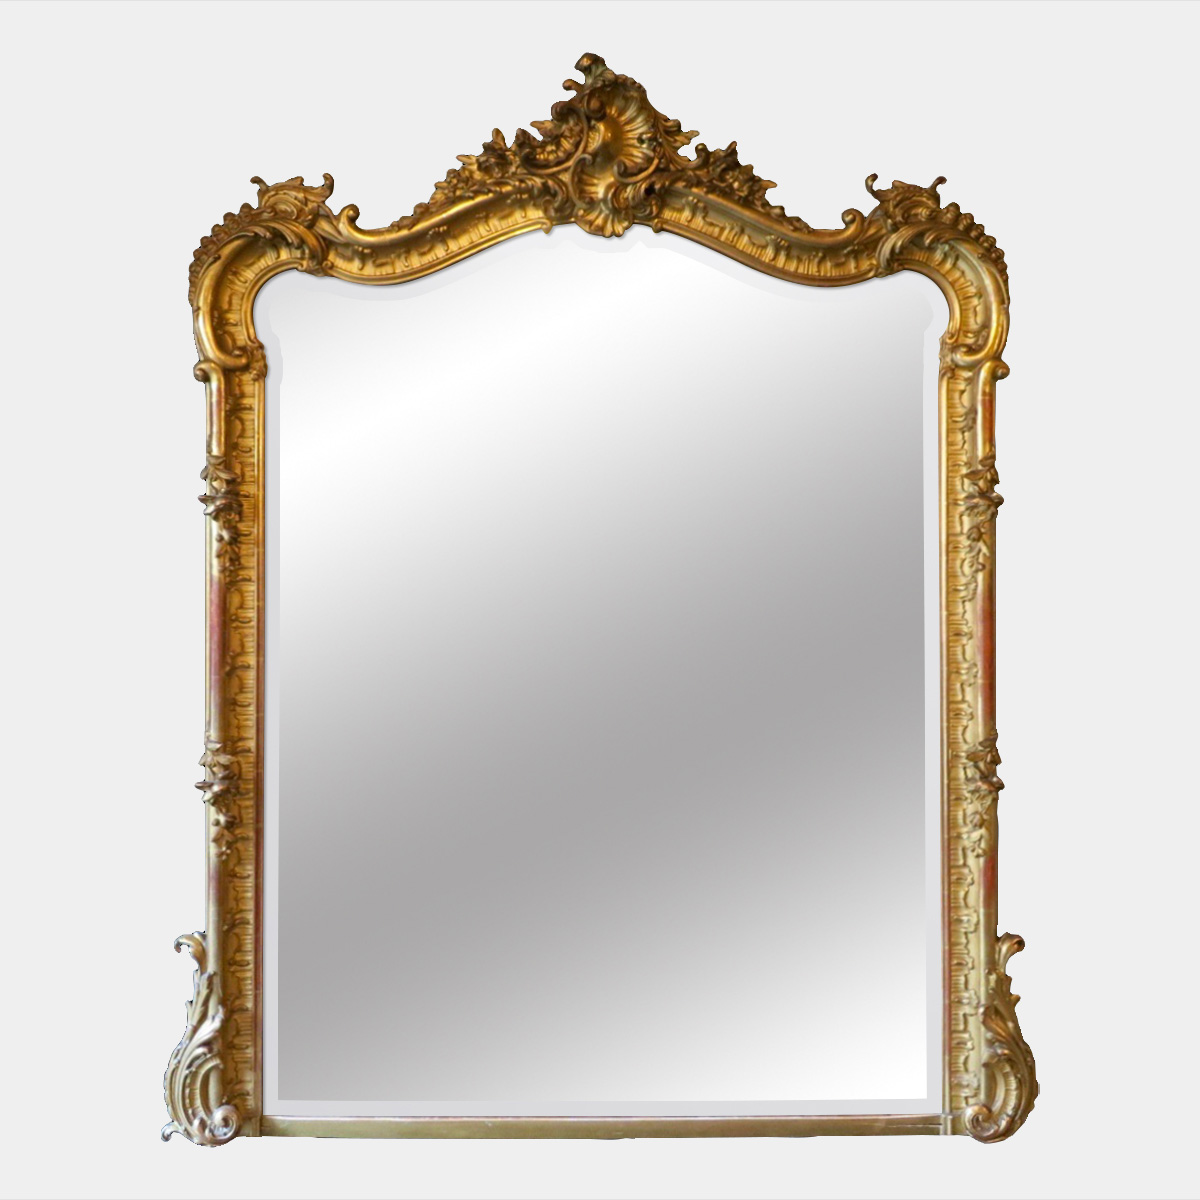 French Rococo Gold Gilt Over Mantle, Rococo Style Gold Mirror